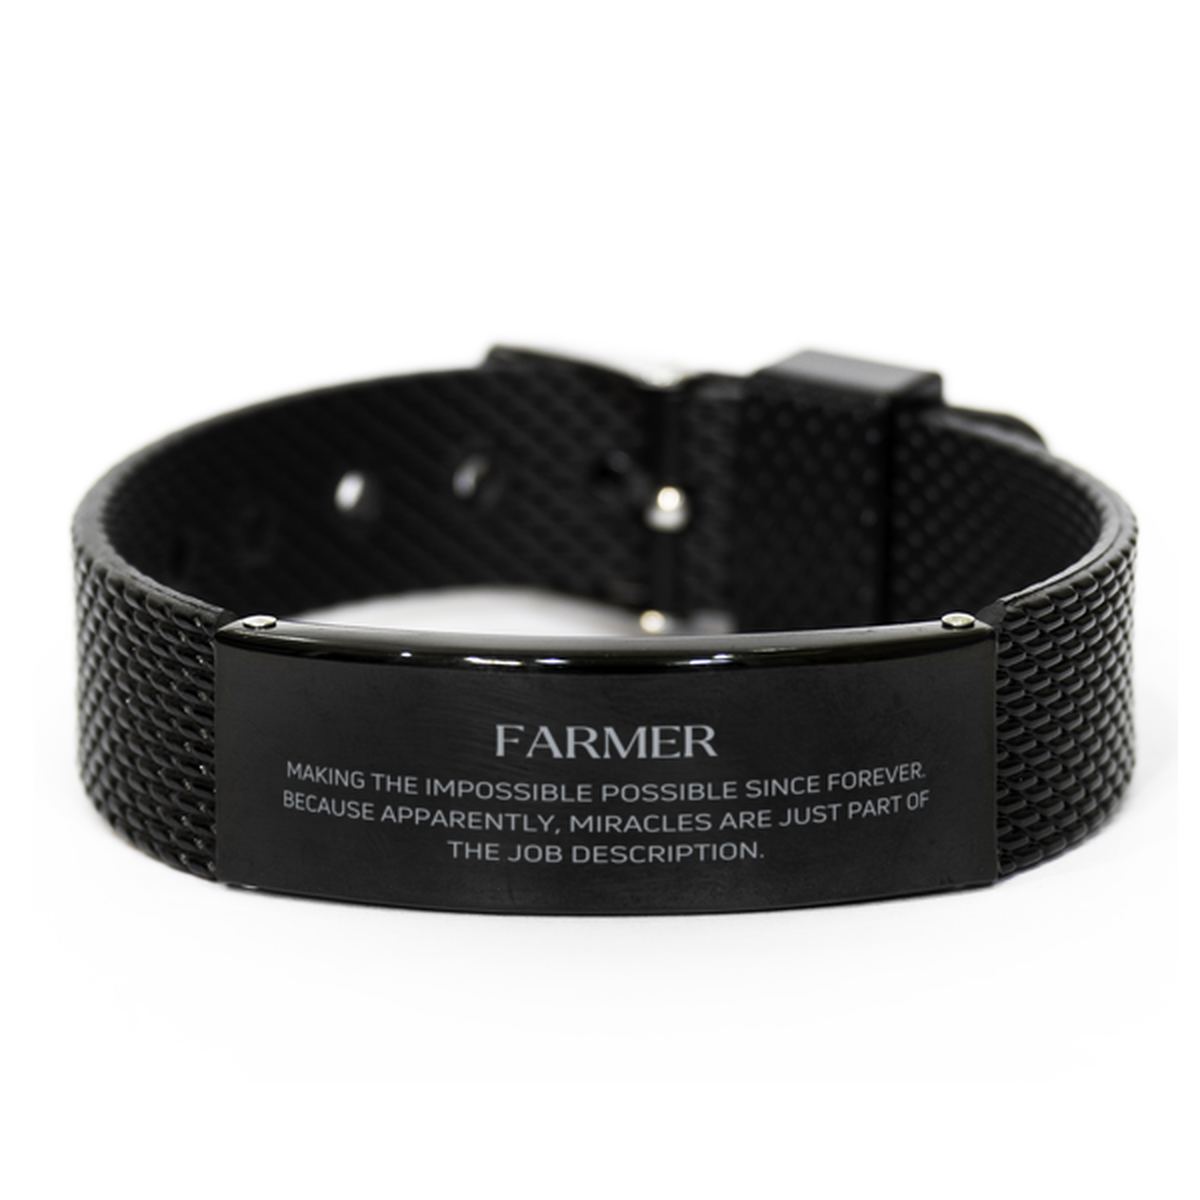 Funny Farmer Gifts, Miracles are just part of the job description, Inspirational Birthday Black Shark Mesh Bracelet For Farmer, Men, Women, Coworkers, Friends, Boss